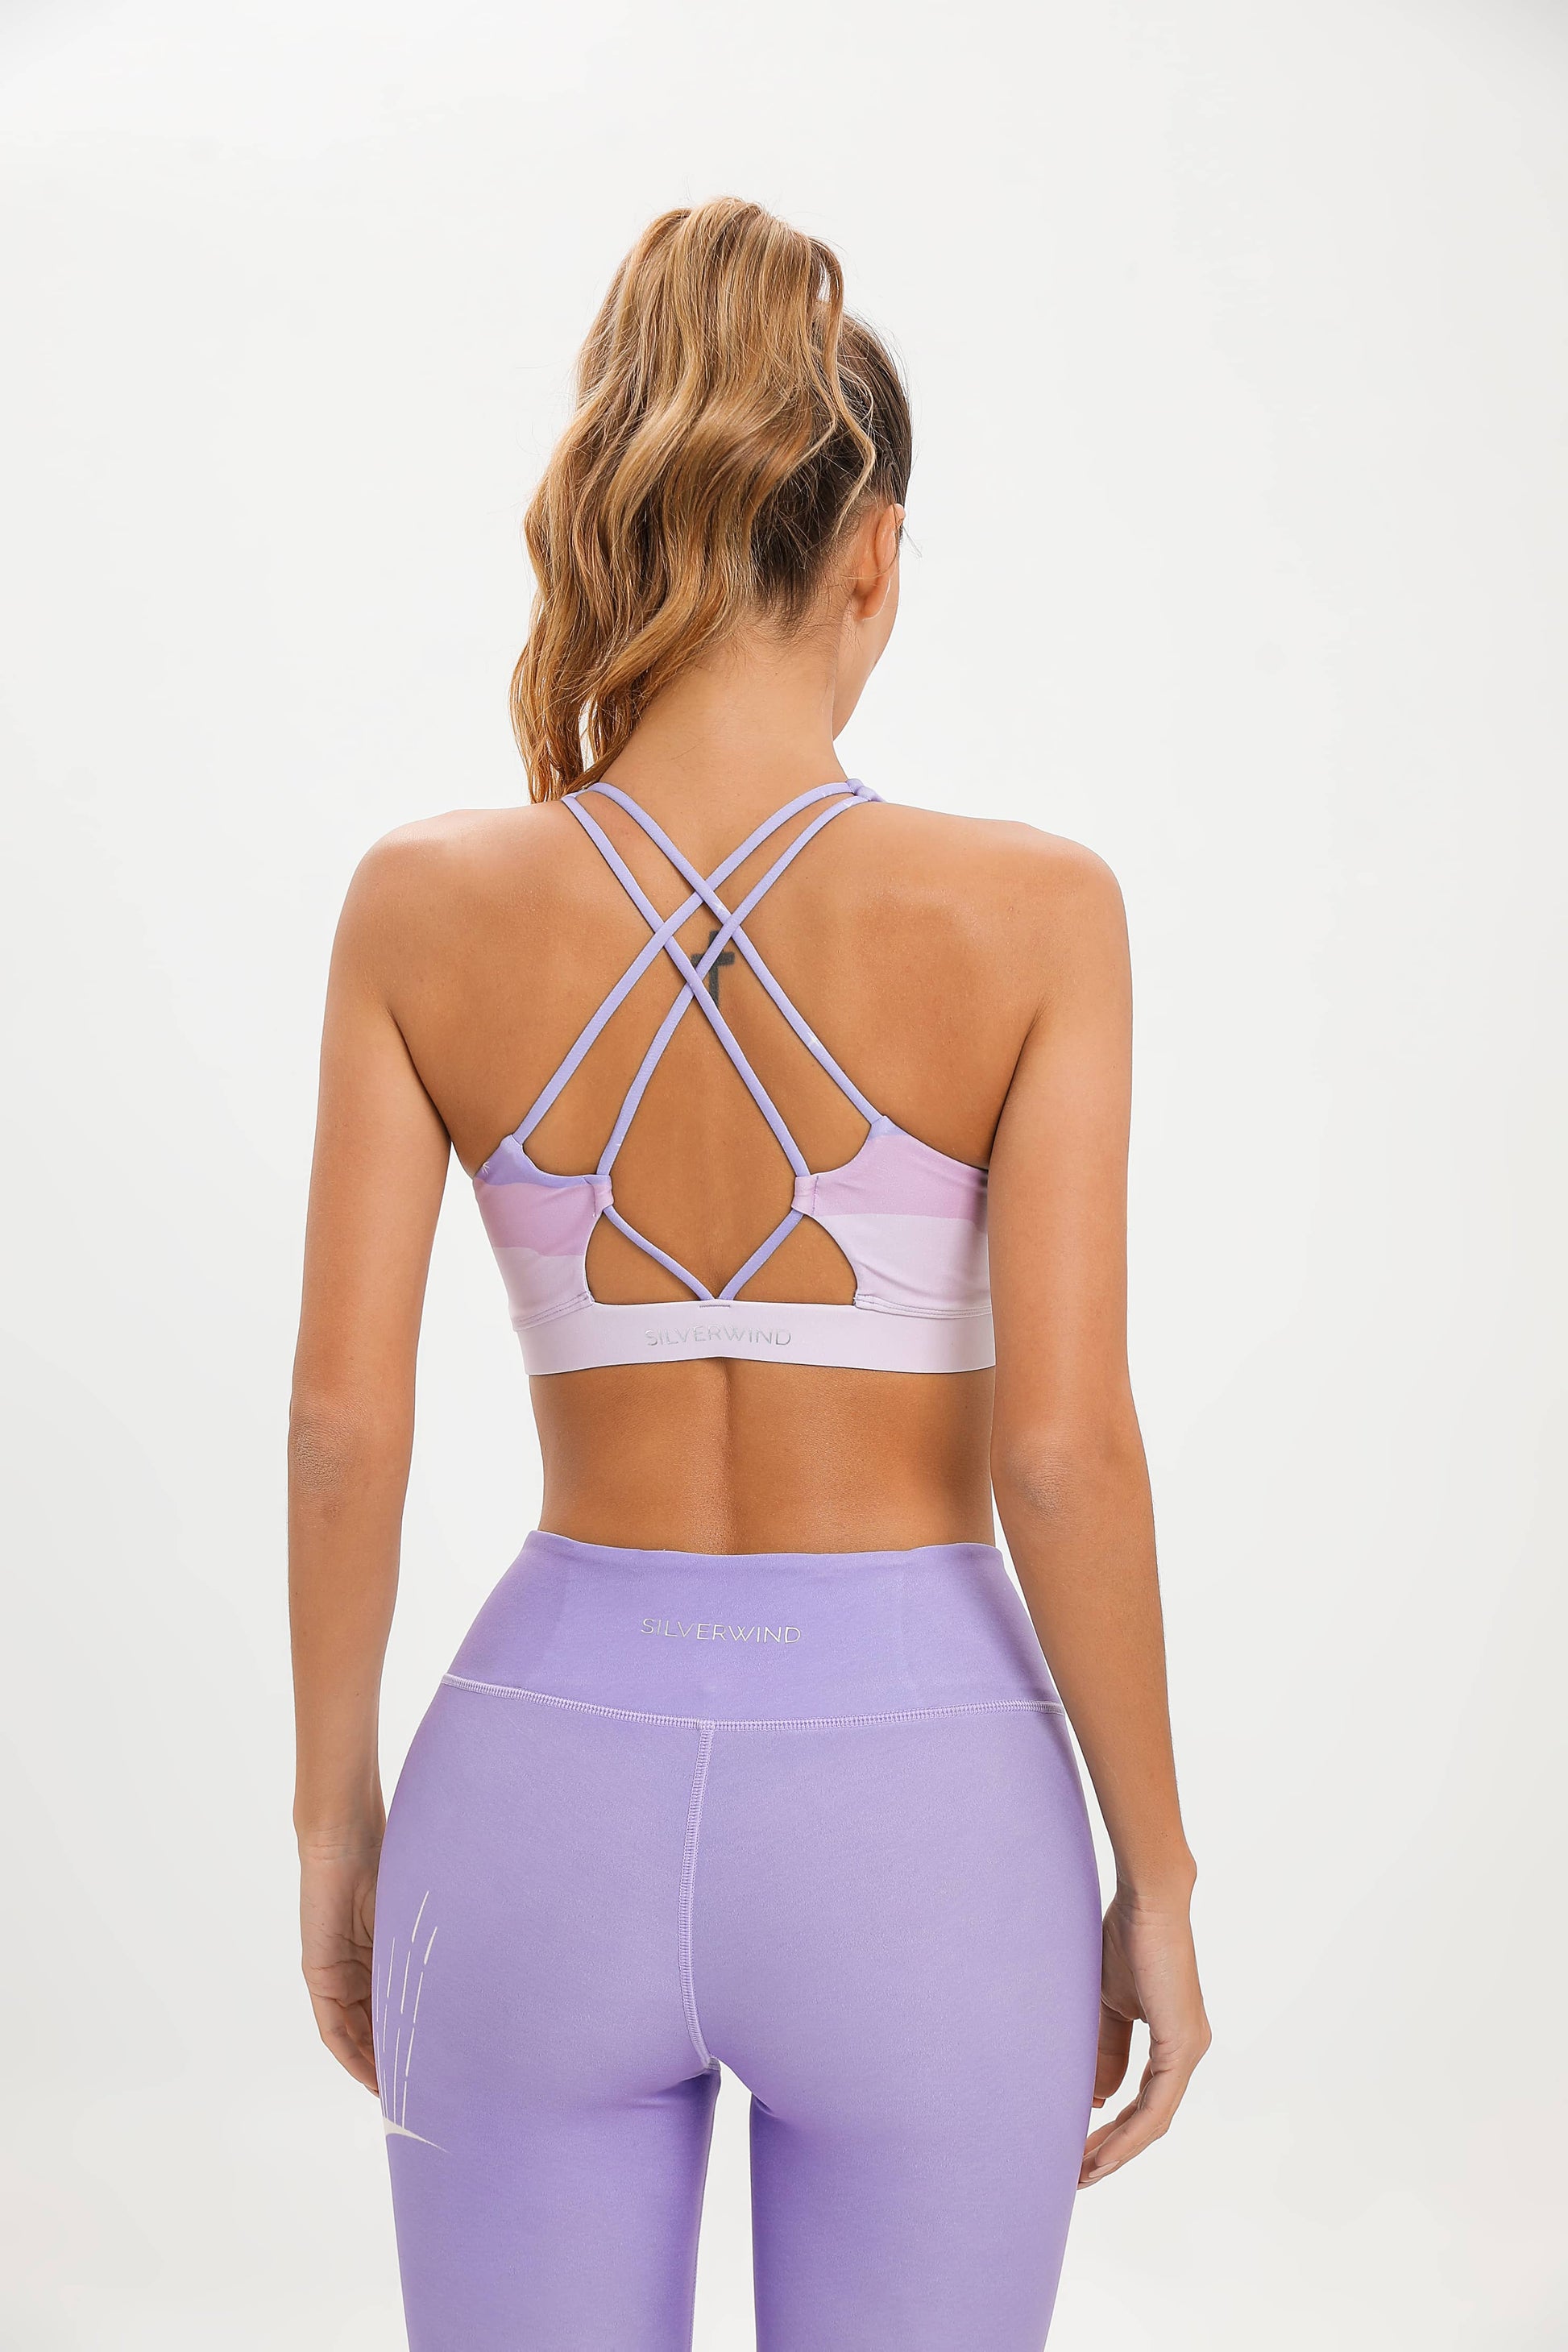 Cross-Strap Sports Bra in Violet color by Chandra Yoga & Active Wear